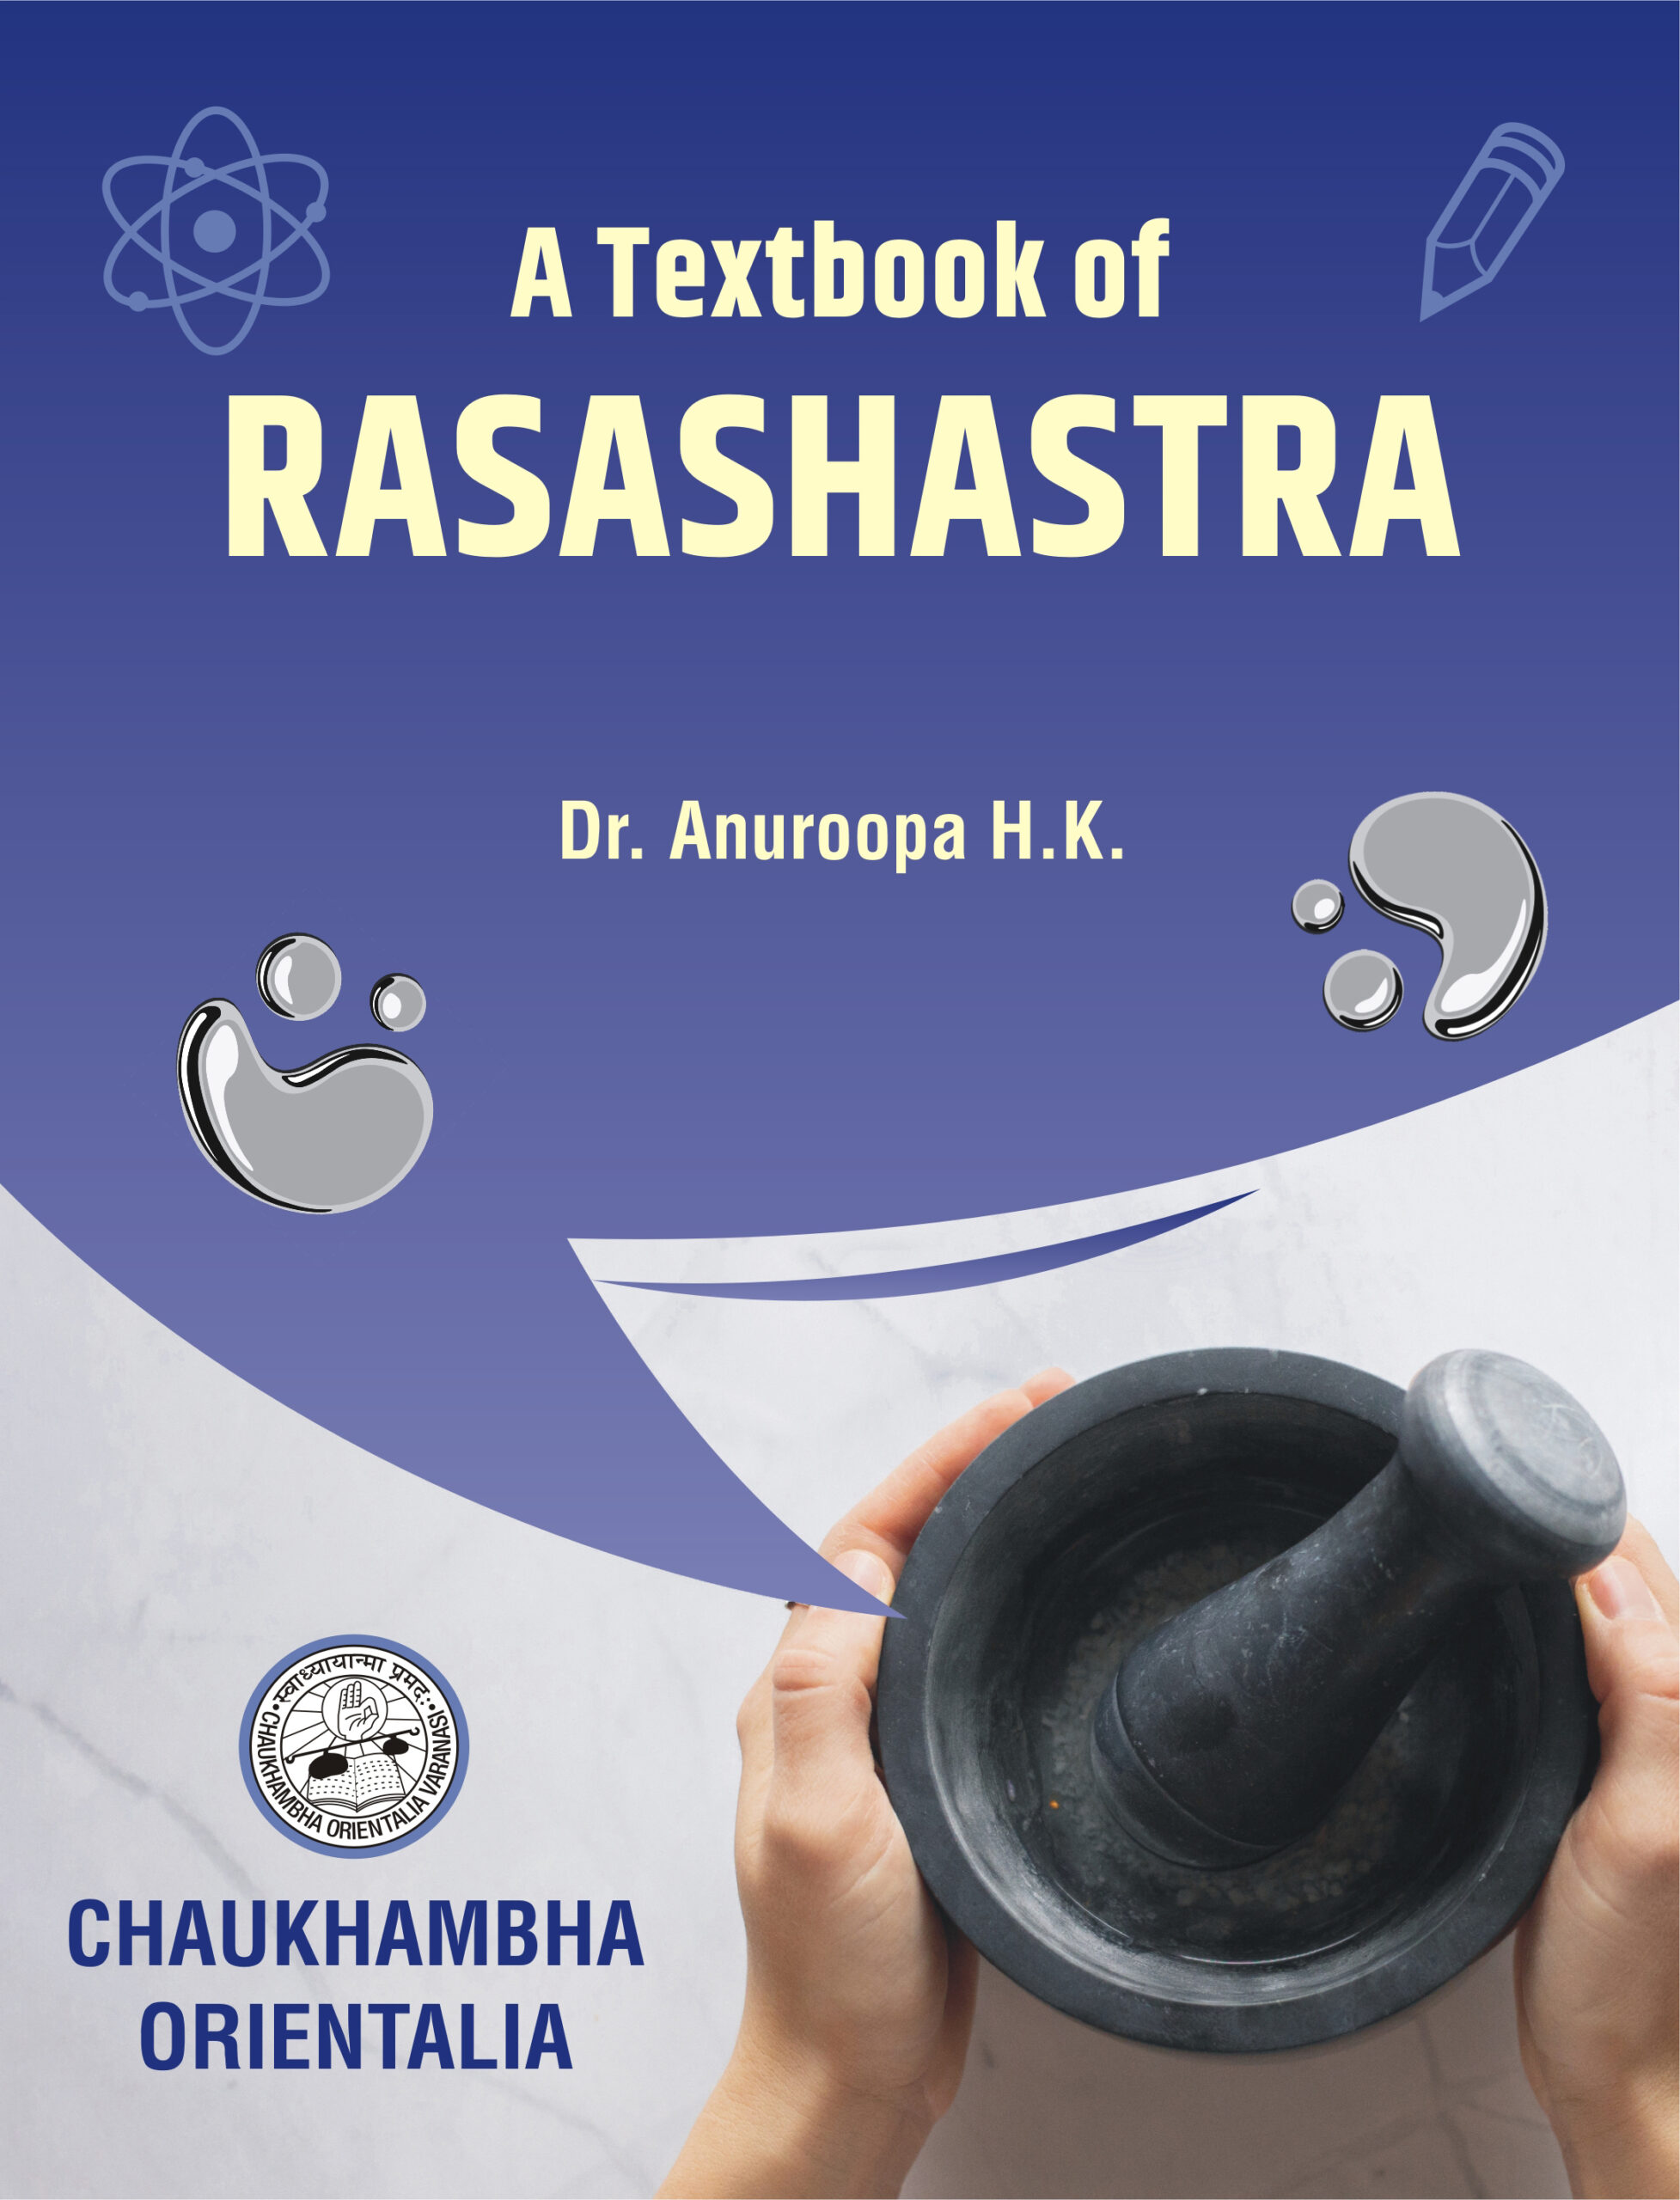 This is the front cover page of the book 'A Textbook of Rasashastra' by Dr. Anuroops HK. The cover is in a shade of purpose with the words 'A Textbook of Rasashastra' written in bold. The page also consists of an illustration of a mortar and a pestle being held by a pair of hands. The bottom left corner contains the logo and the name of the publisher, Chaukhambha Orientalia.